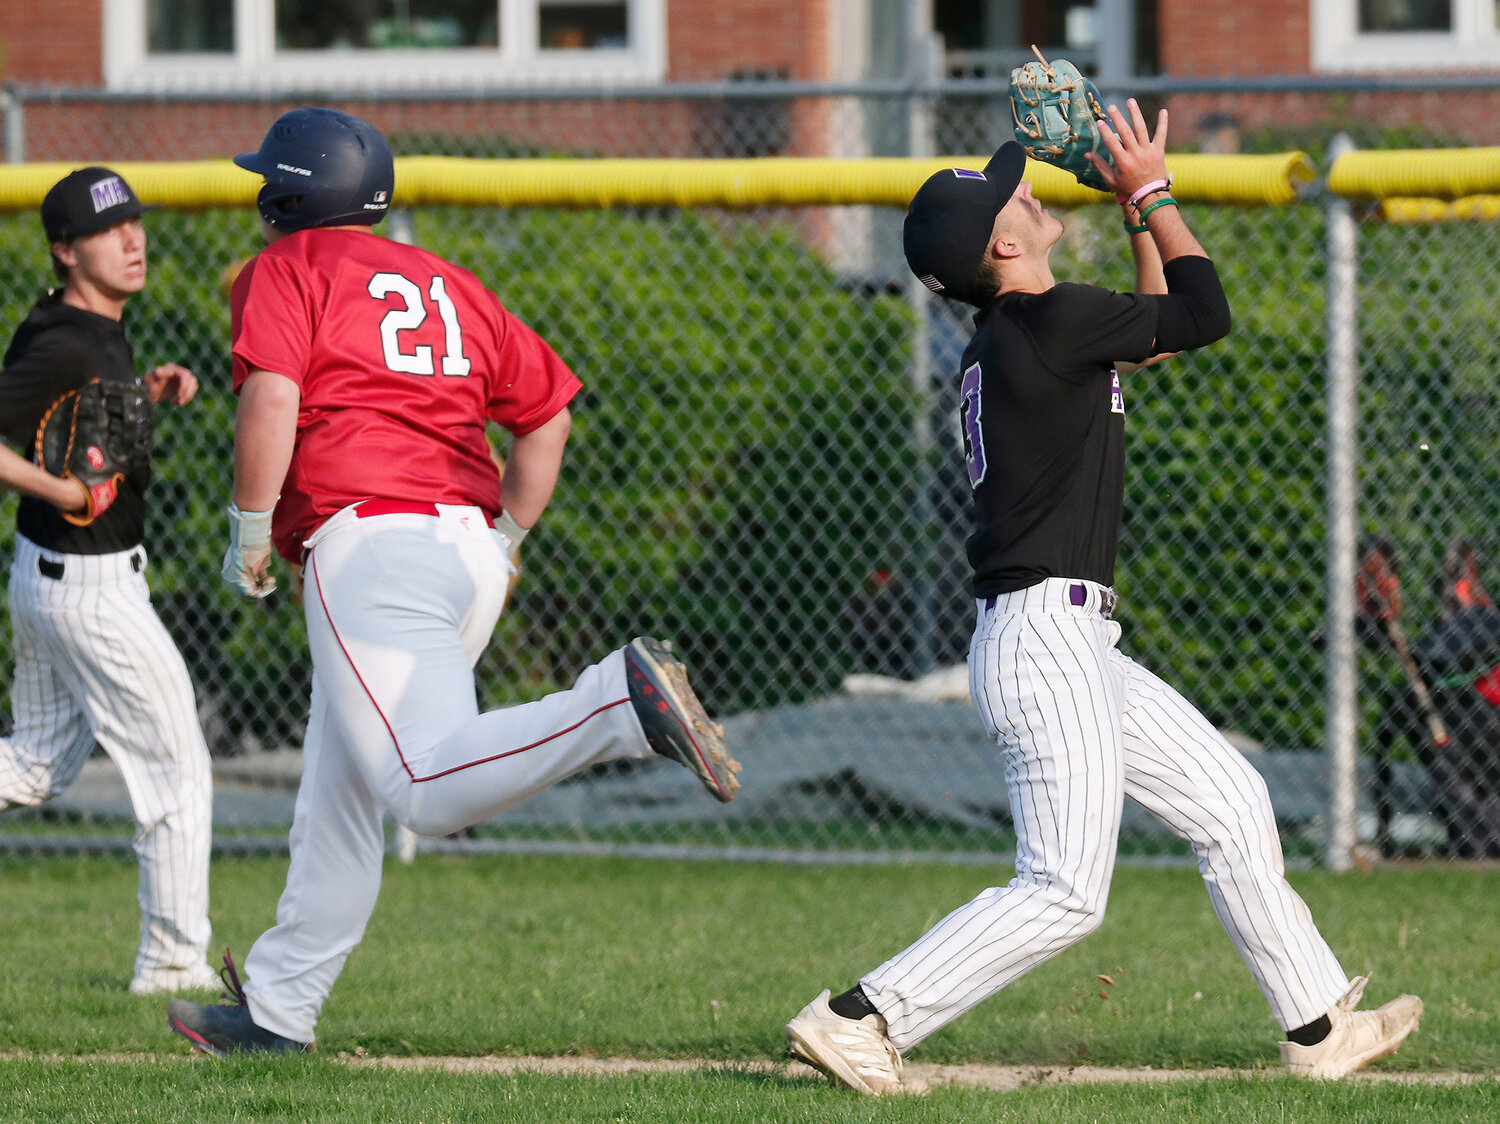 Relief pitcher Parker Camelo (right) runs in to catch an infield fly.